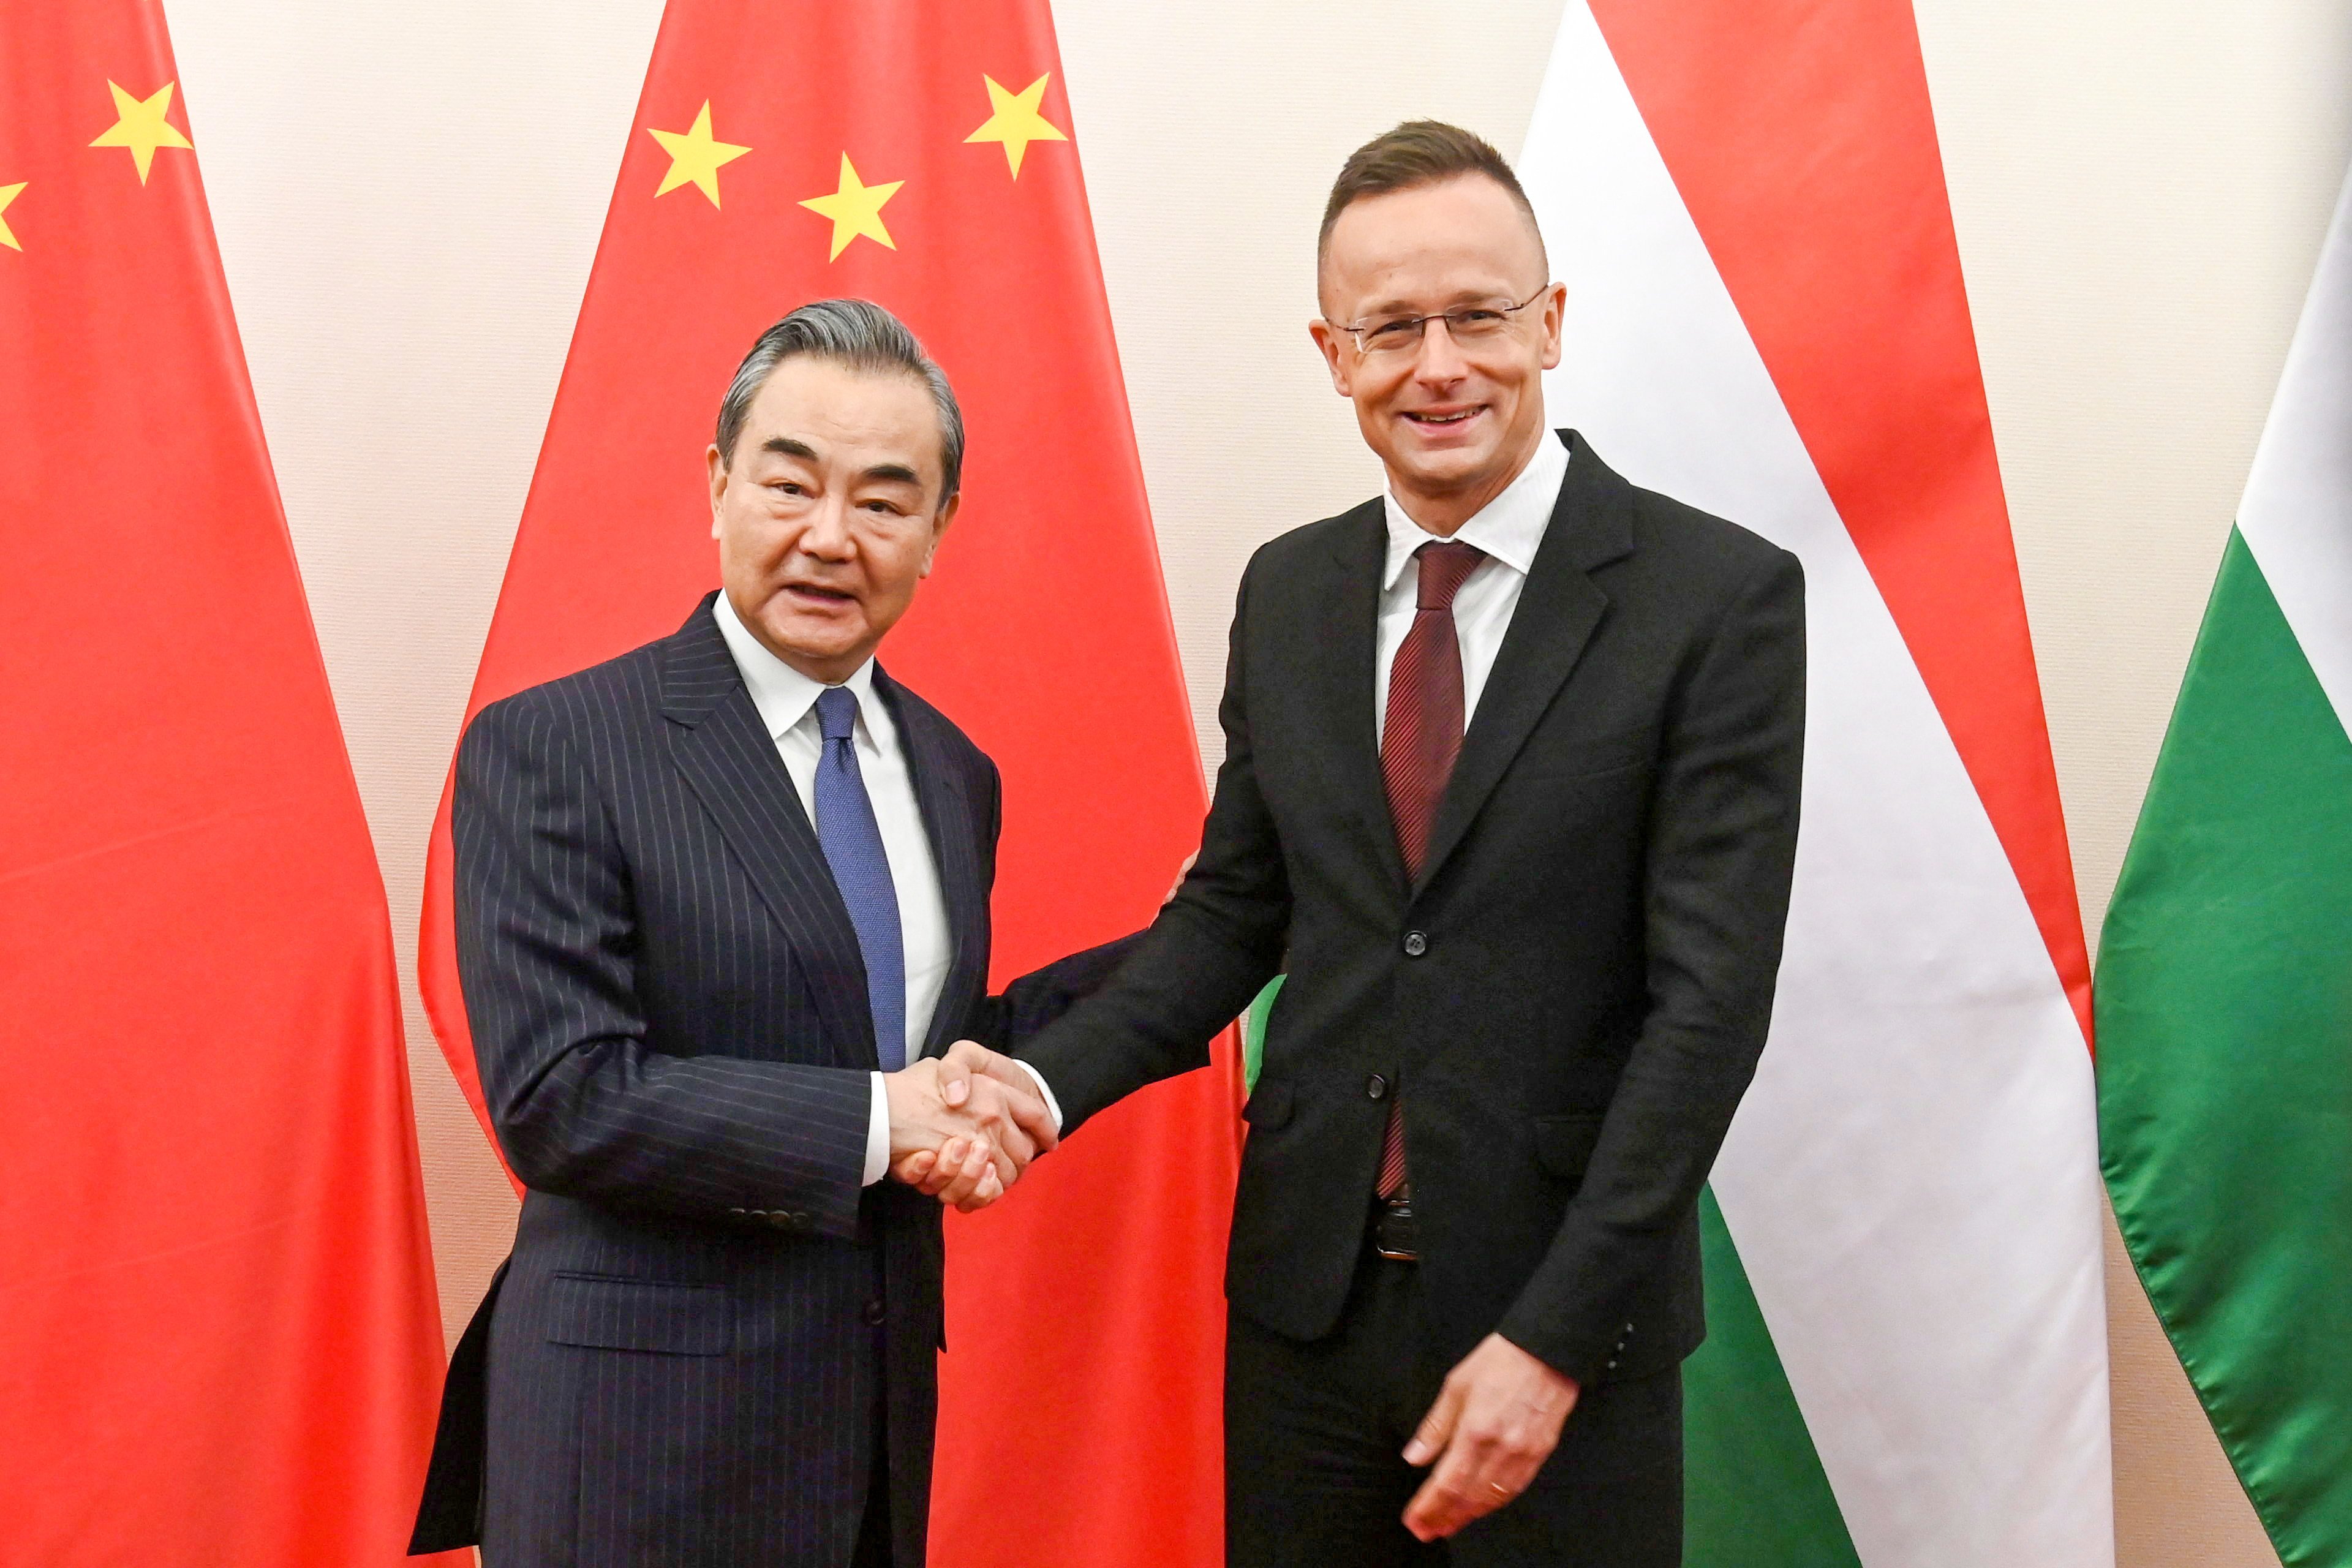 Hungary’s Minister of Foreign Affairs and Trade Peter Szijjarto (right) welcomes China’s Foreign Minister Wang Yi in Budapest. Photo: EPA-EFE